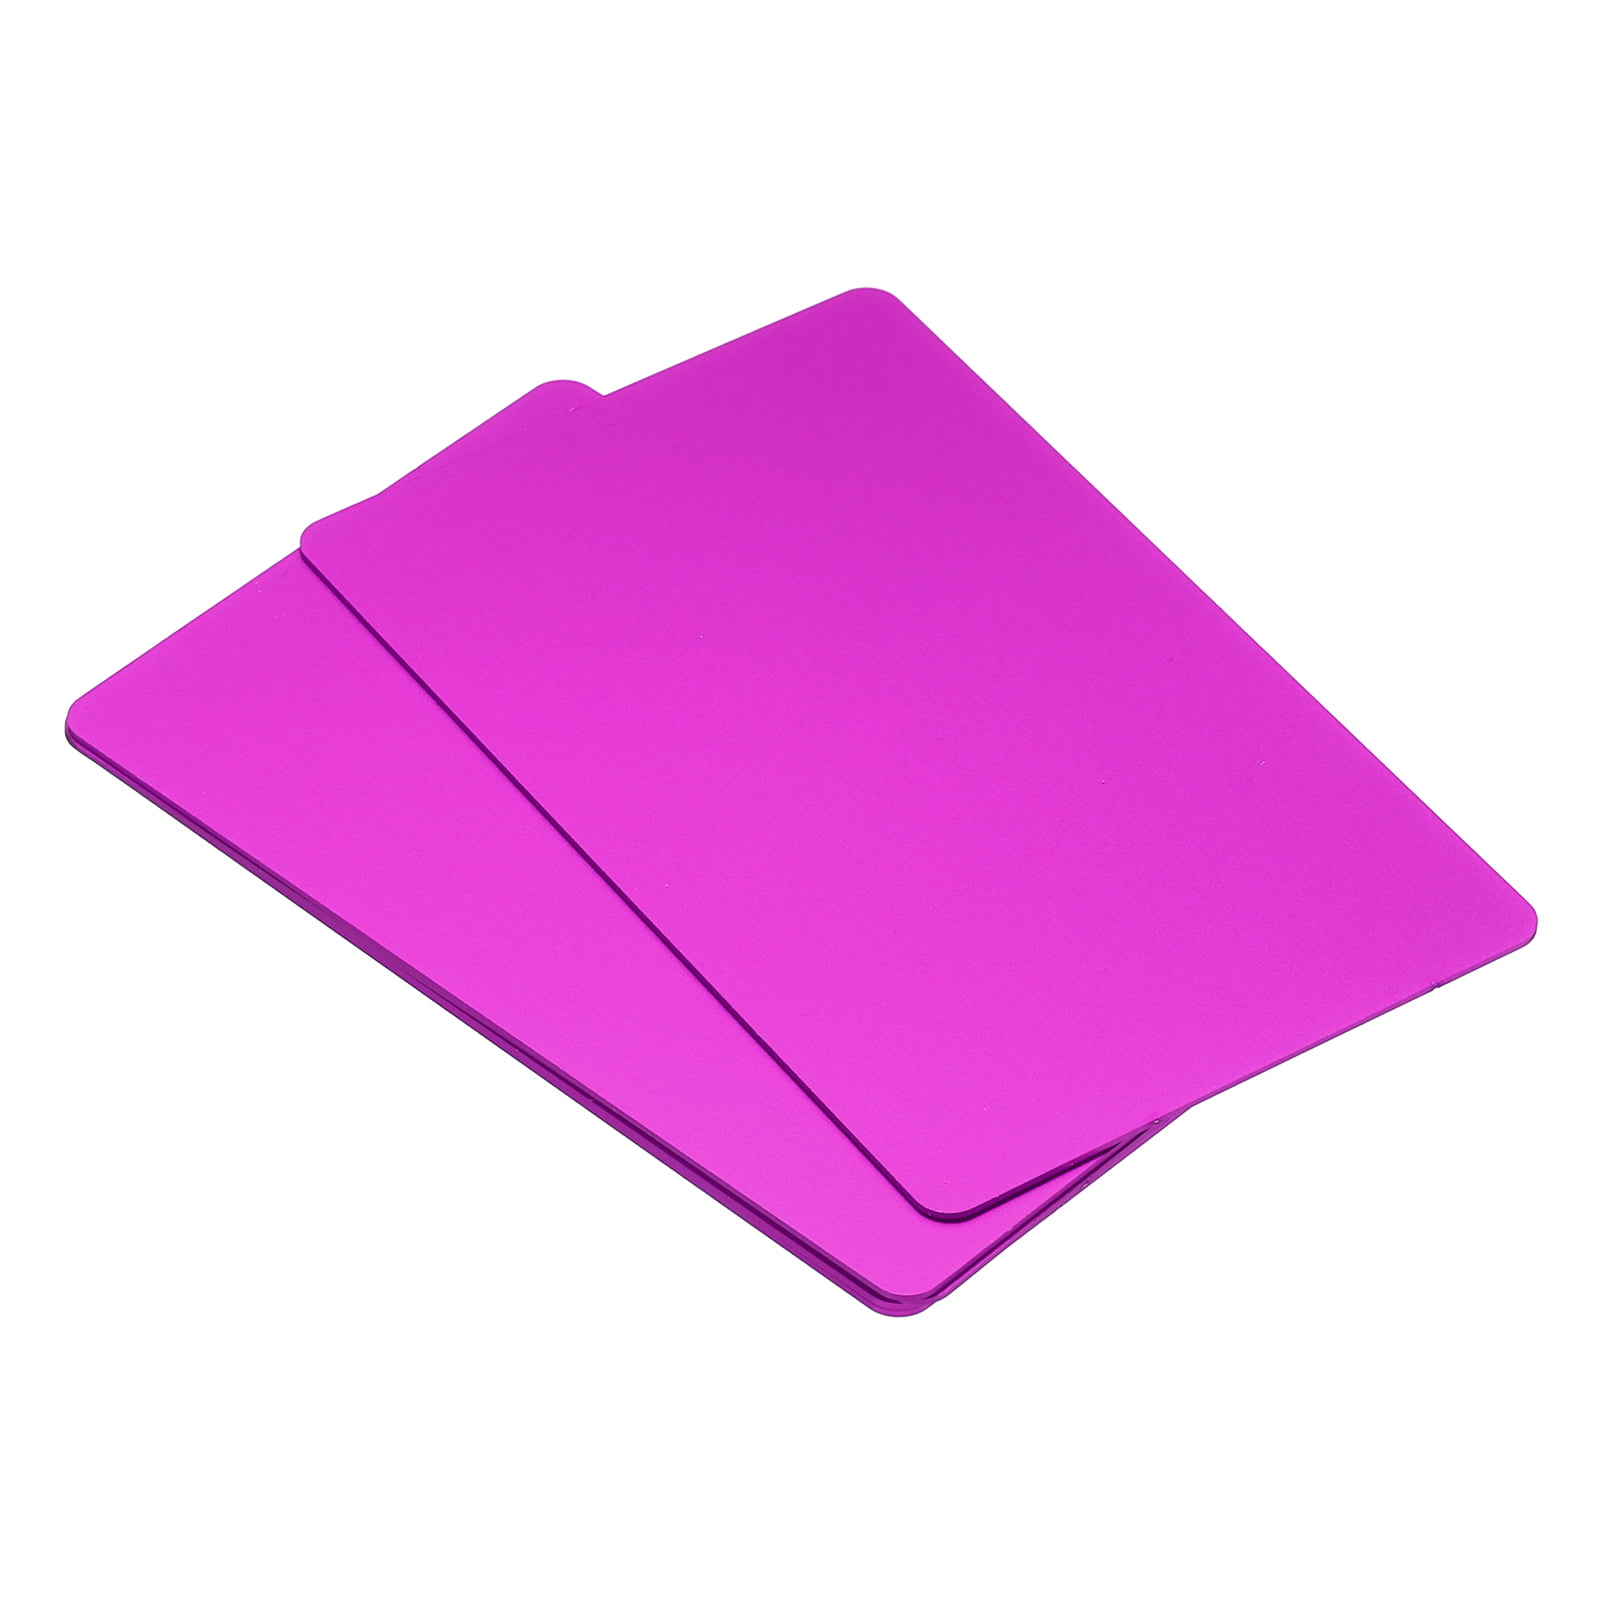 100 Pink Anodized Aluminum Business Cards Blanks for Laser